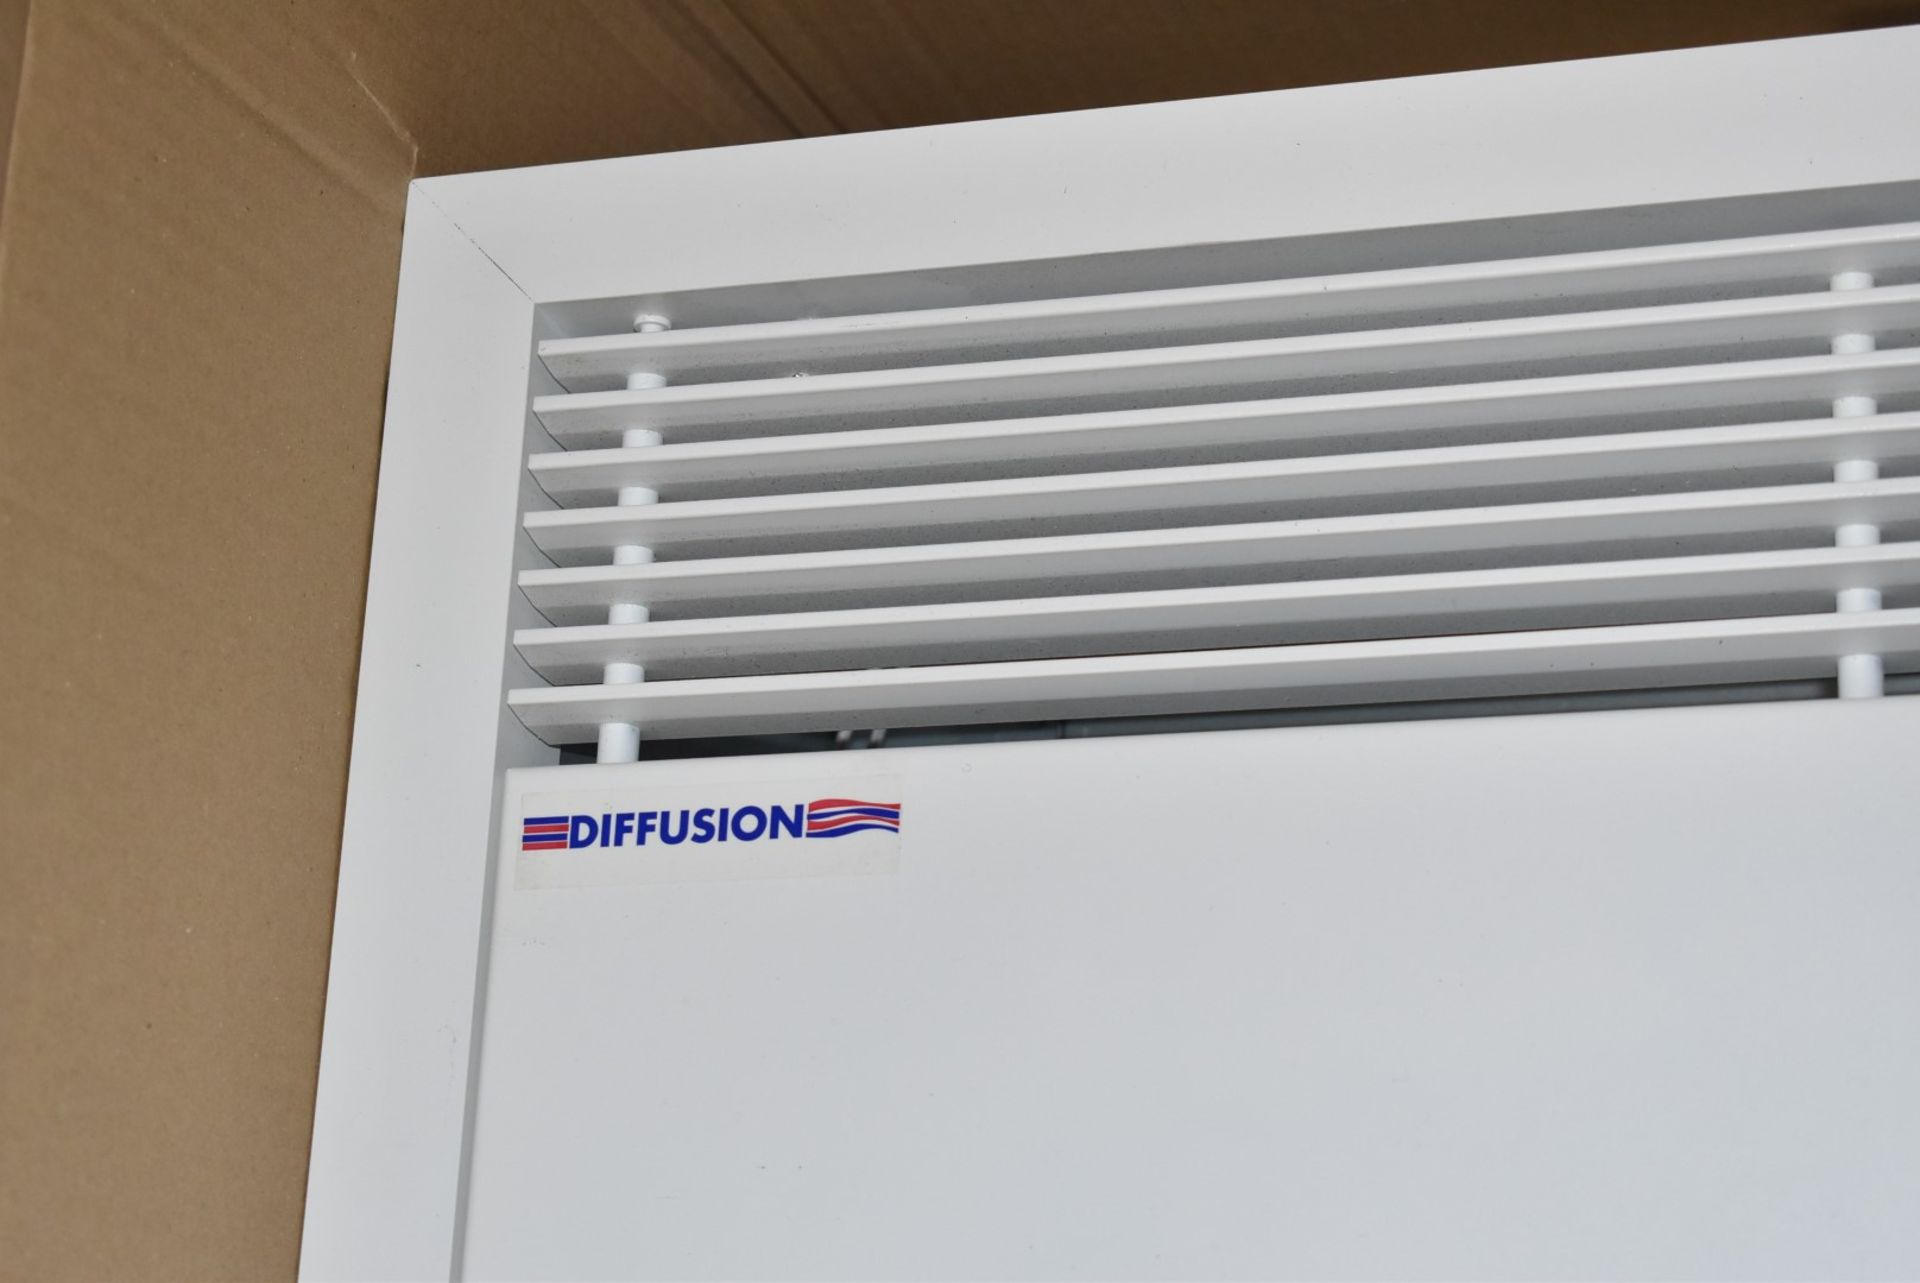 1 x Diffusion Suspended Ceiling 1.5kw Air Heating Unit - Size: 60 x 60 cms - Comes With Original Box - Image 10 of 10